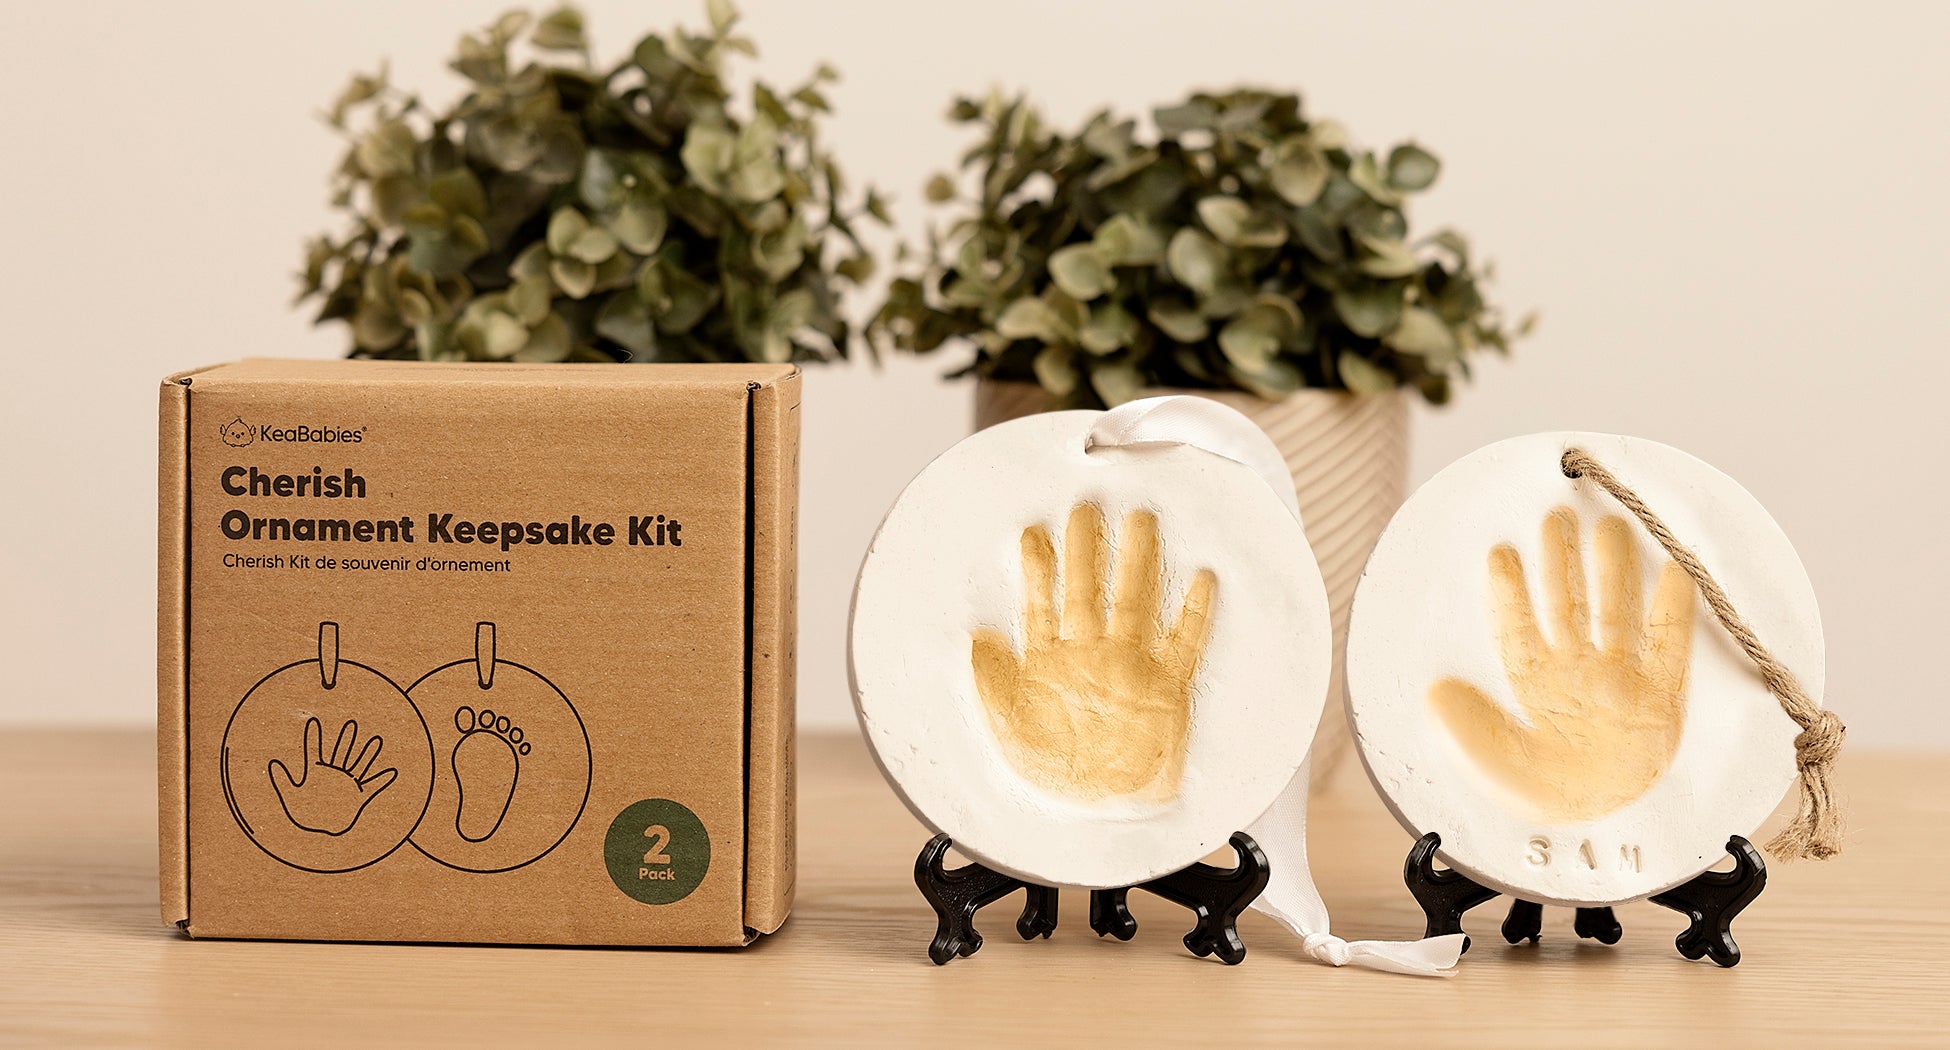  Family Handprint Kit - Gifts for New Parents -Create Lasting  DIY Craft Keepsake Wooden Frame -Includes 5 Paint Colors - Transparent  Sheets (Brown) : Baby